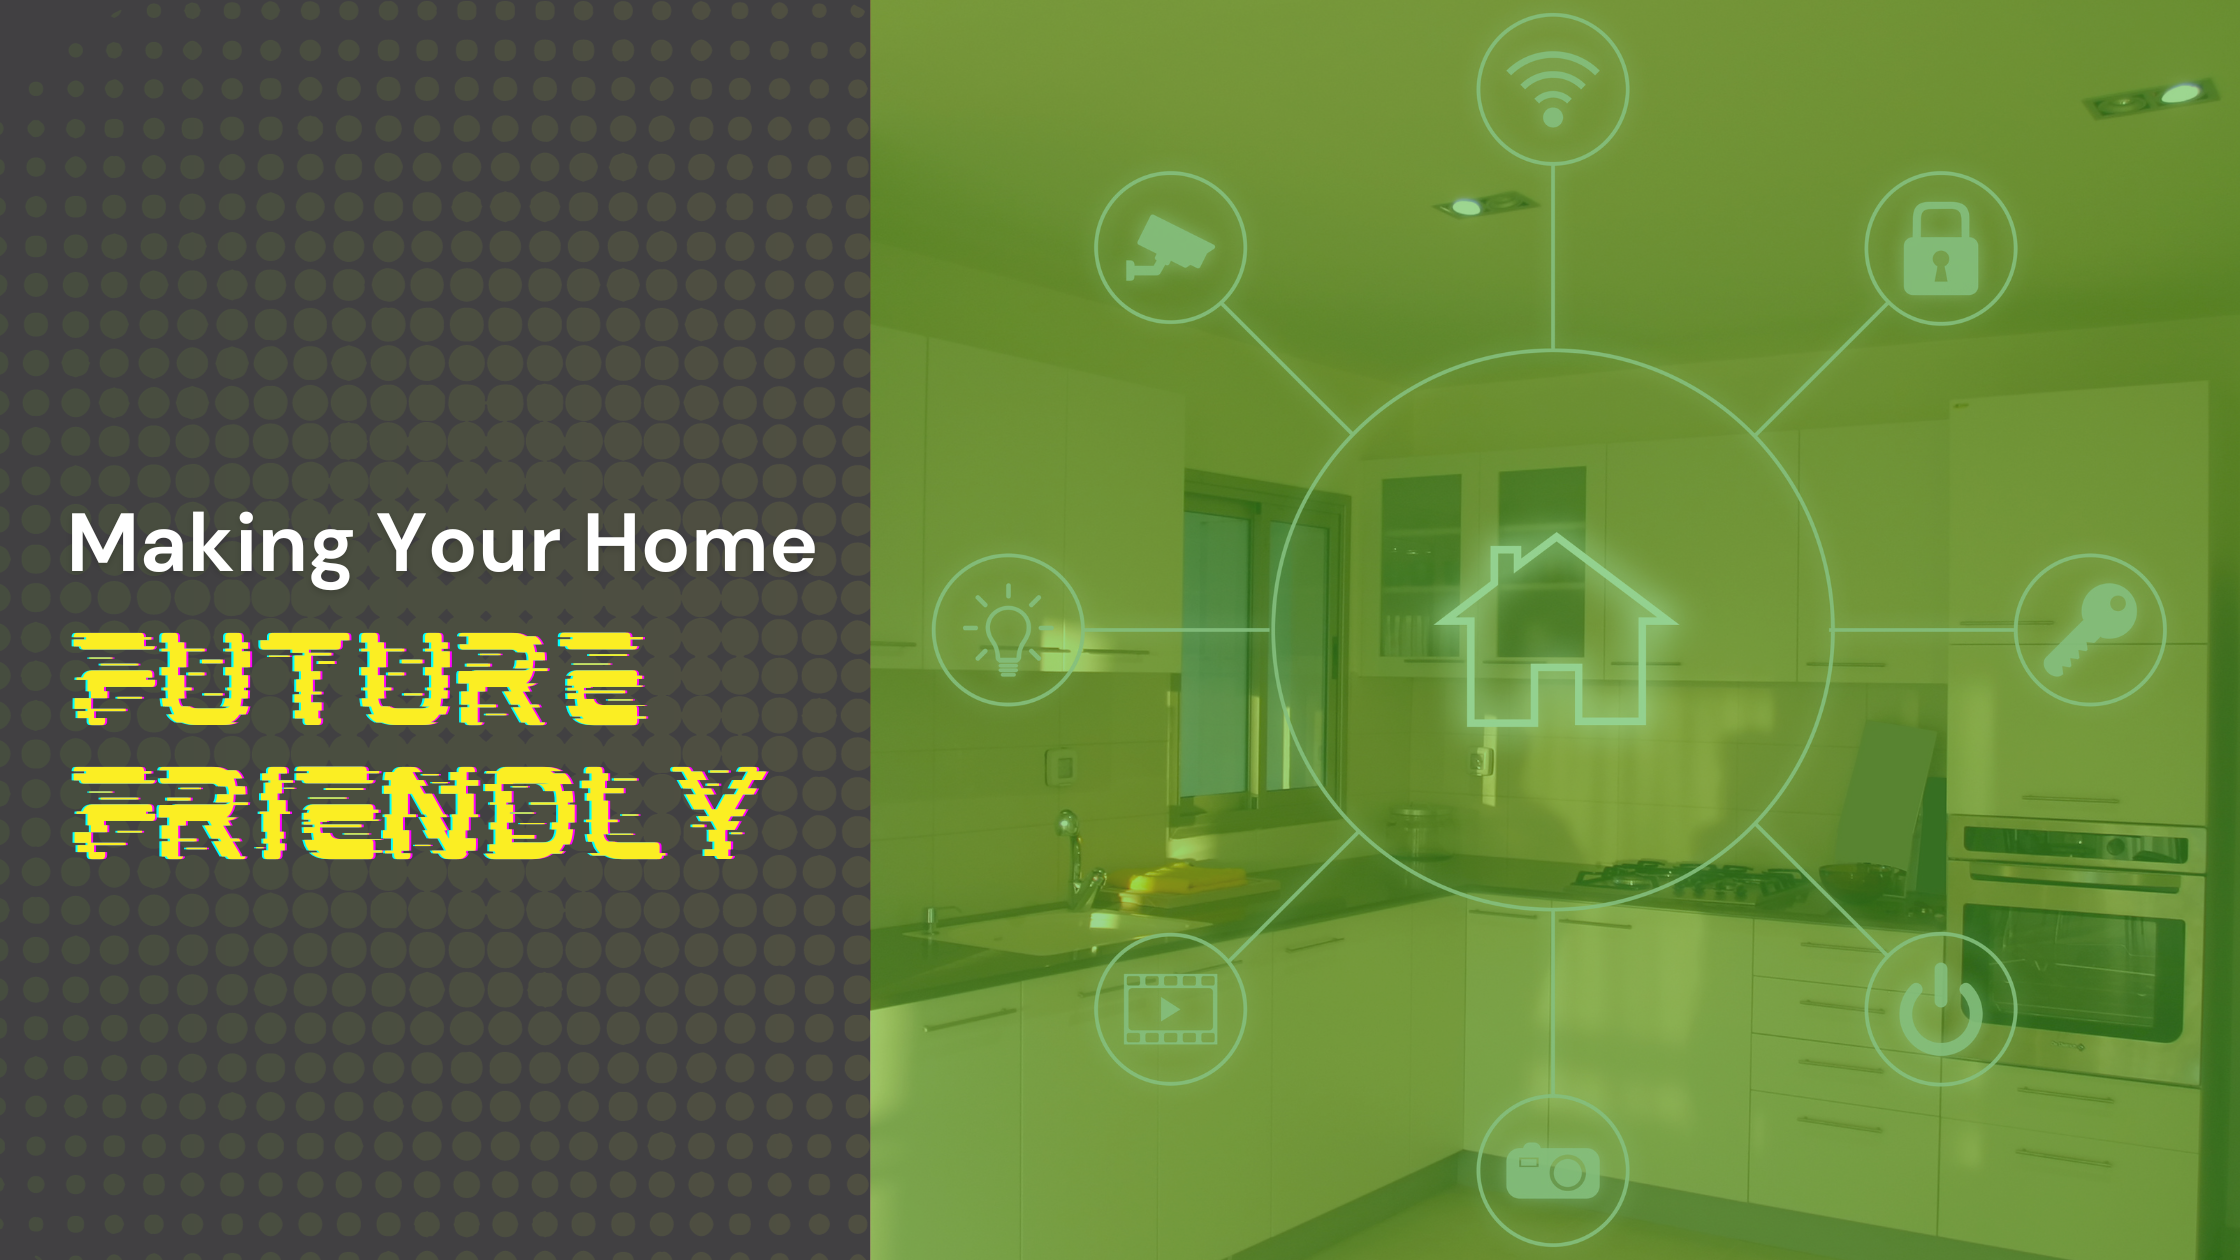 smart home gadgets floating and text that readings "making your home future-friendly"